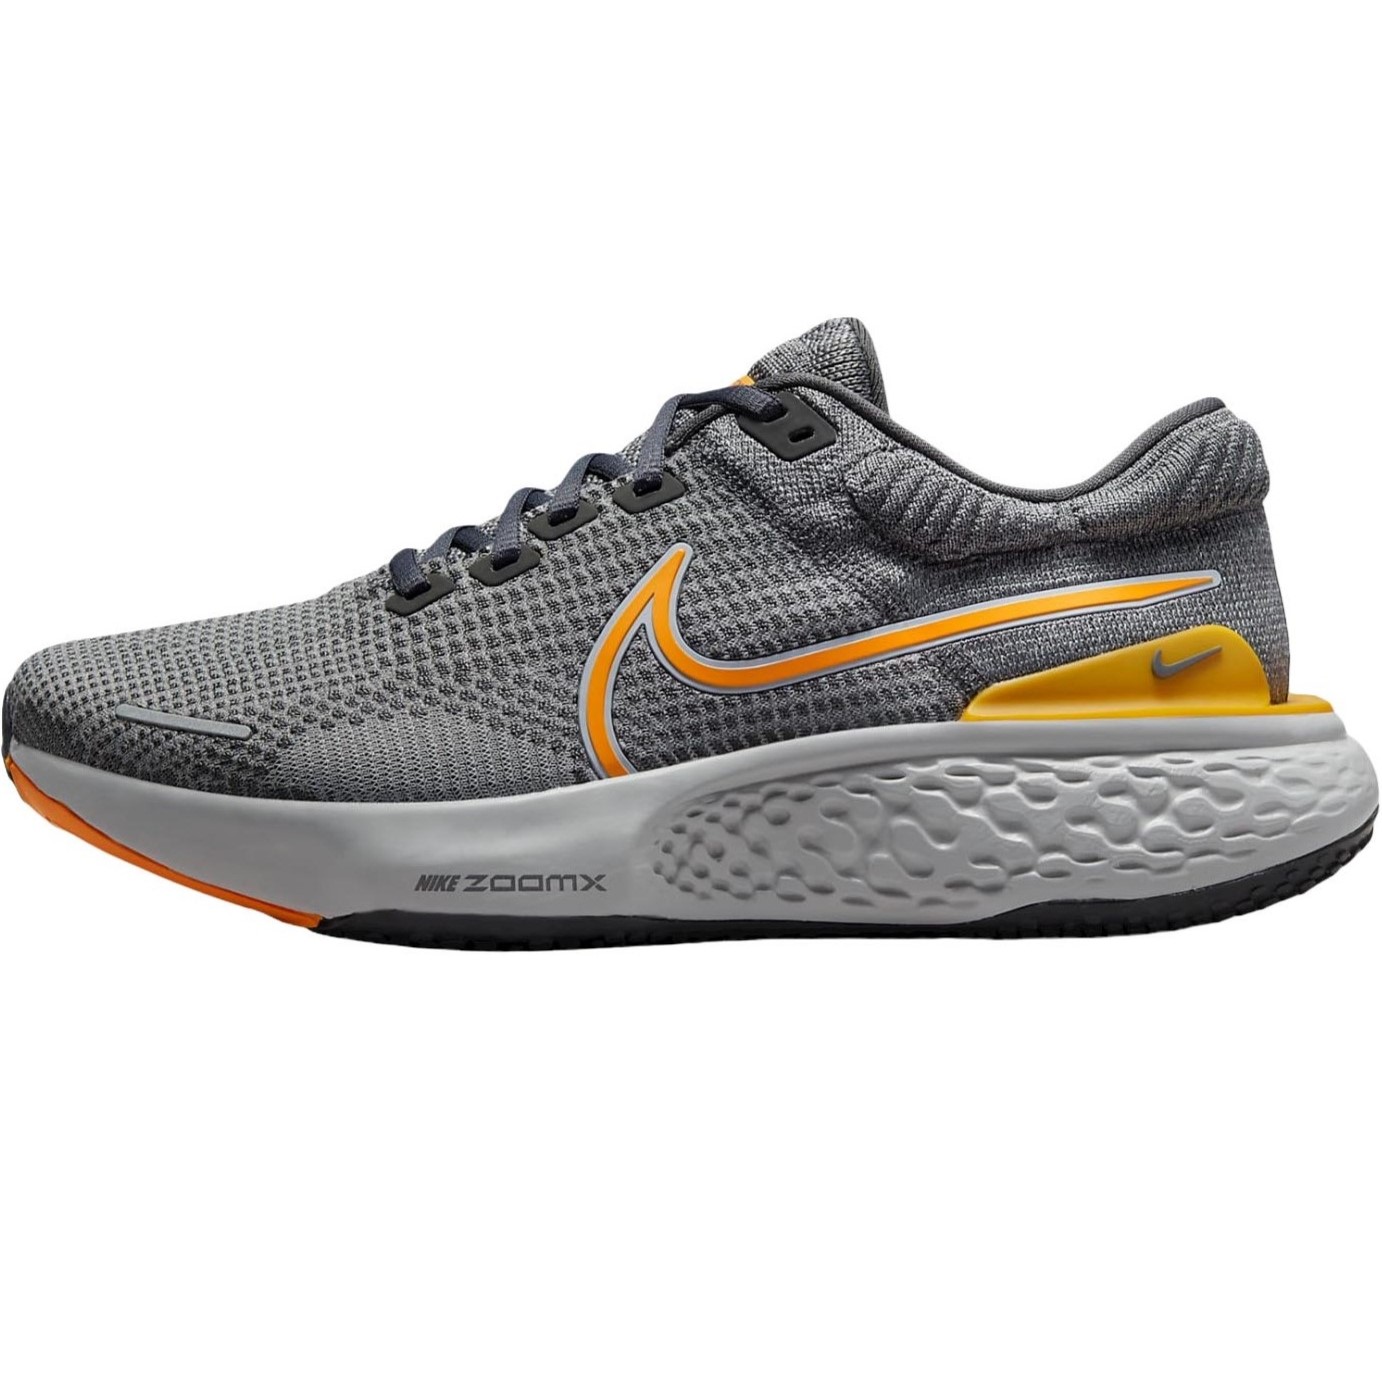 GIÀY THỂ THAO NIKE NAM ZOOMX INVINCIBLE RUN FLYKNIT 2 IRON GREY MARATHON RUNNING SHOES DH5425-002 3